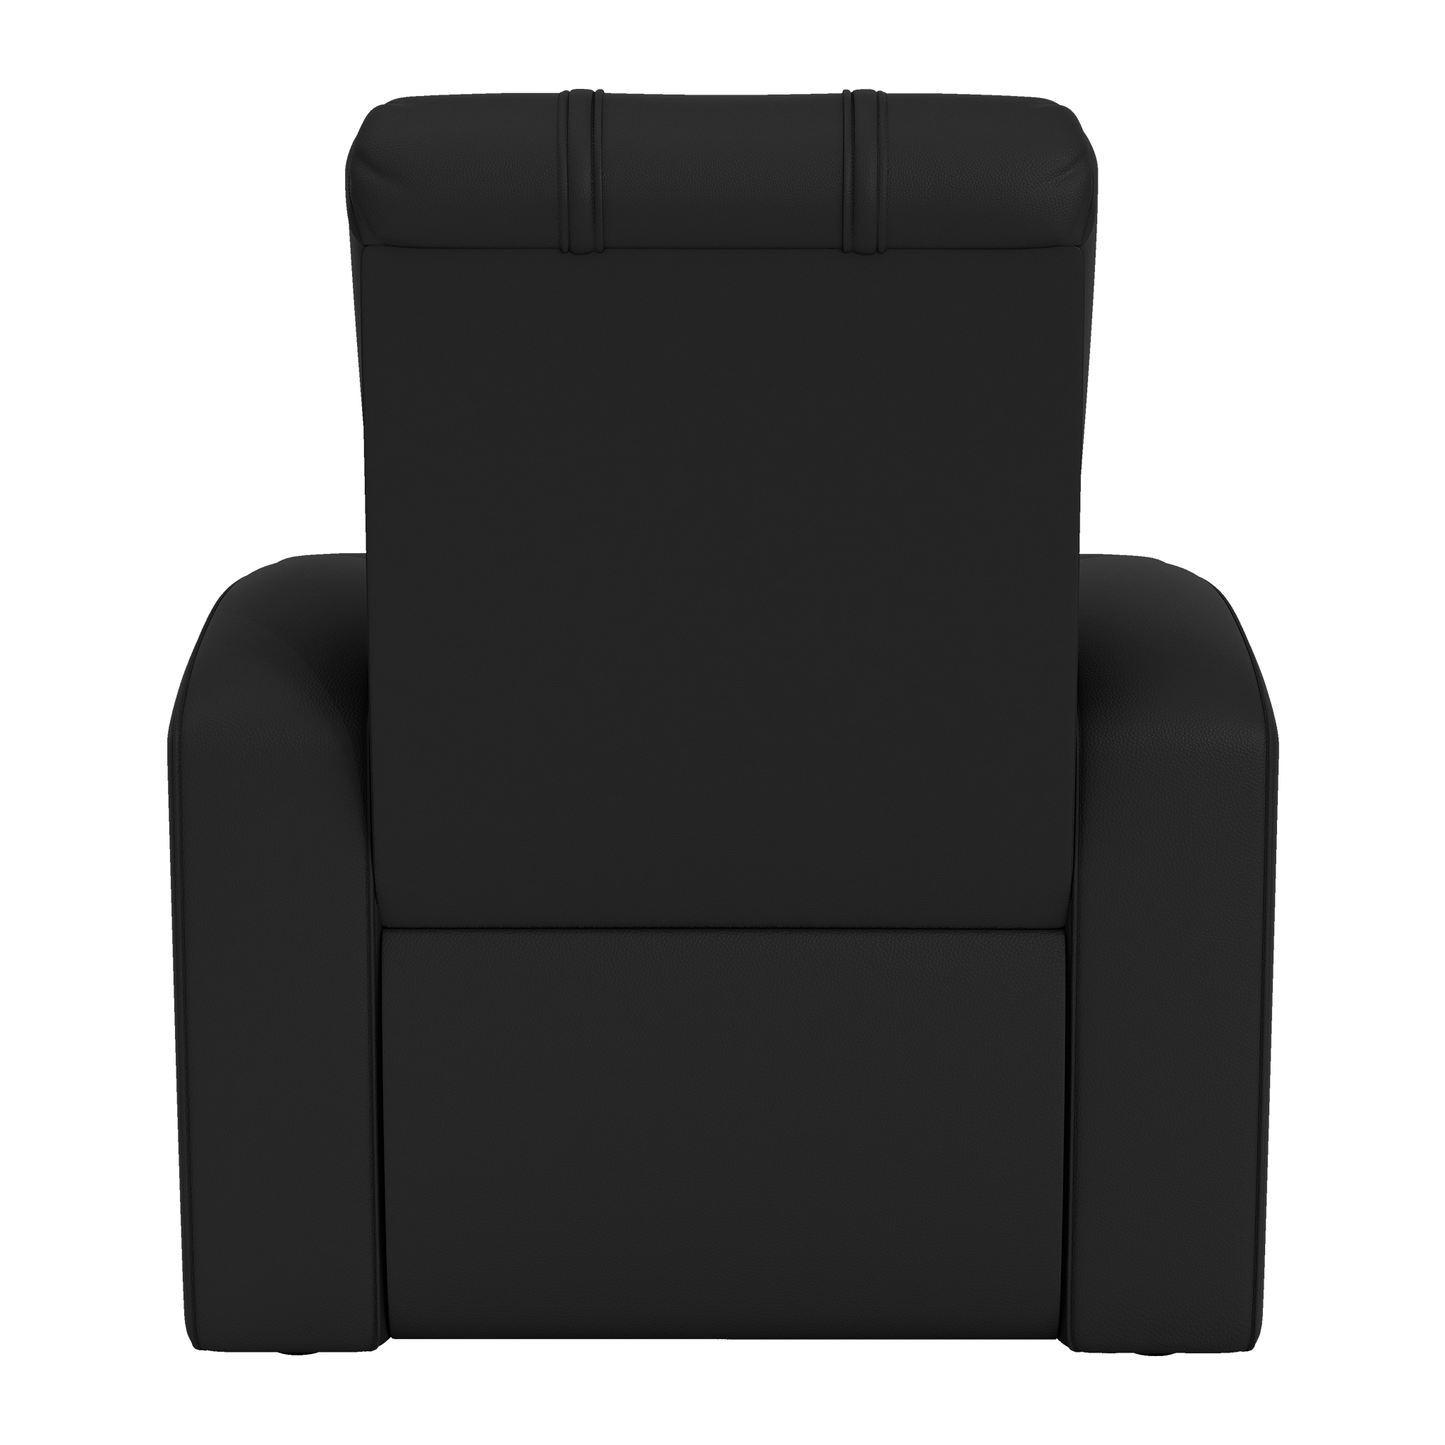 Relax Home Theater Recliner with Kitten with Yarn Logo Panel